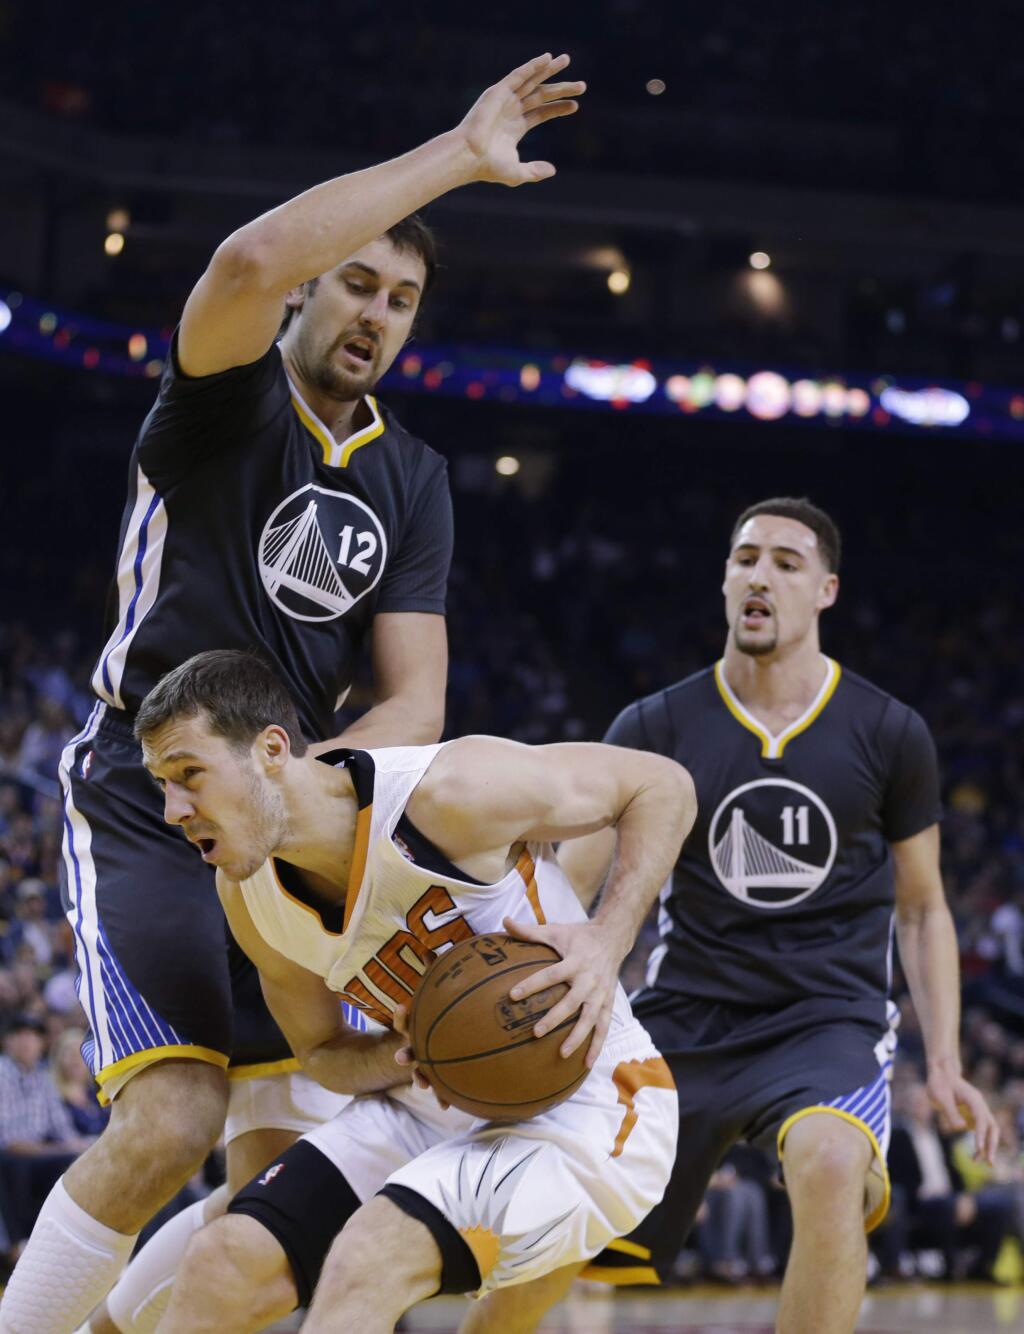 Phoenix Suns' Goran Dragic, bottom, is defended by Golden State Warriors' Andrew Bogut (12) during the first half of an NBA basketball game Saturday, Jan. 31, 2015, in Oakland, Calif. (AP Photo/Marcio Jose Sanchez)